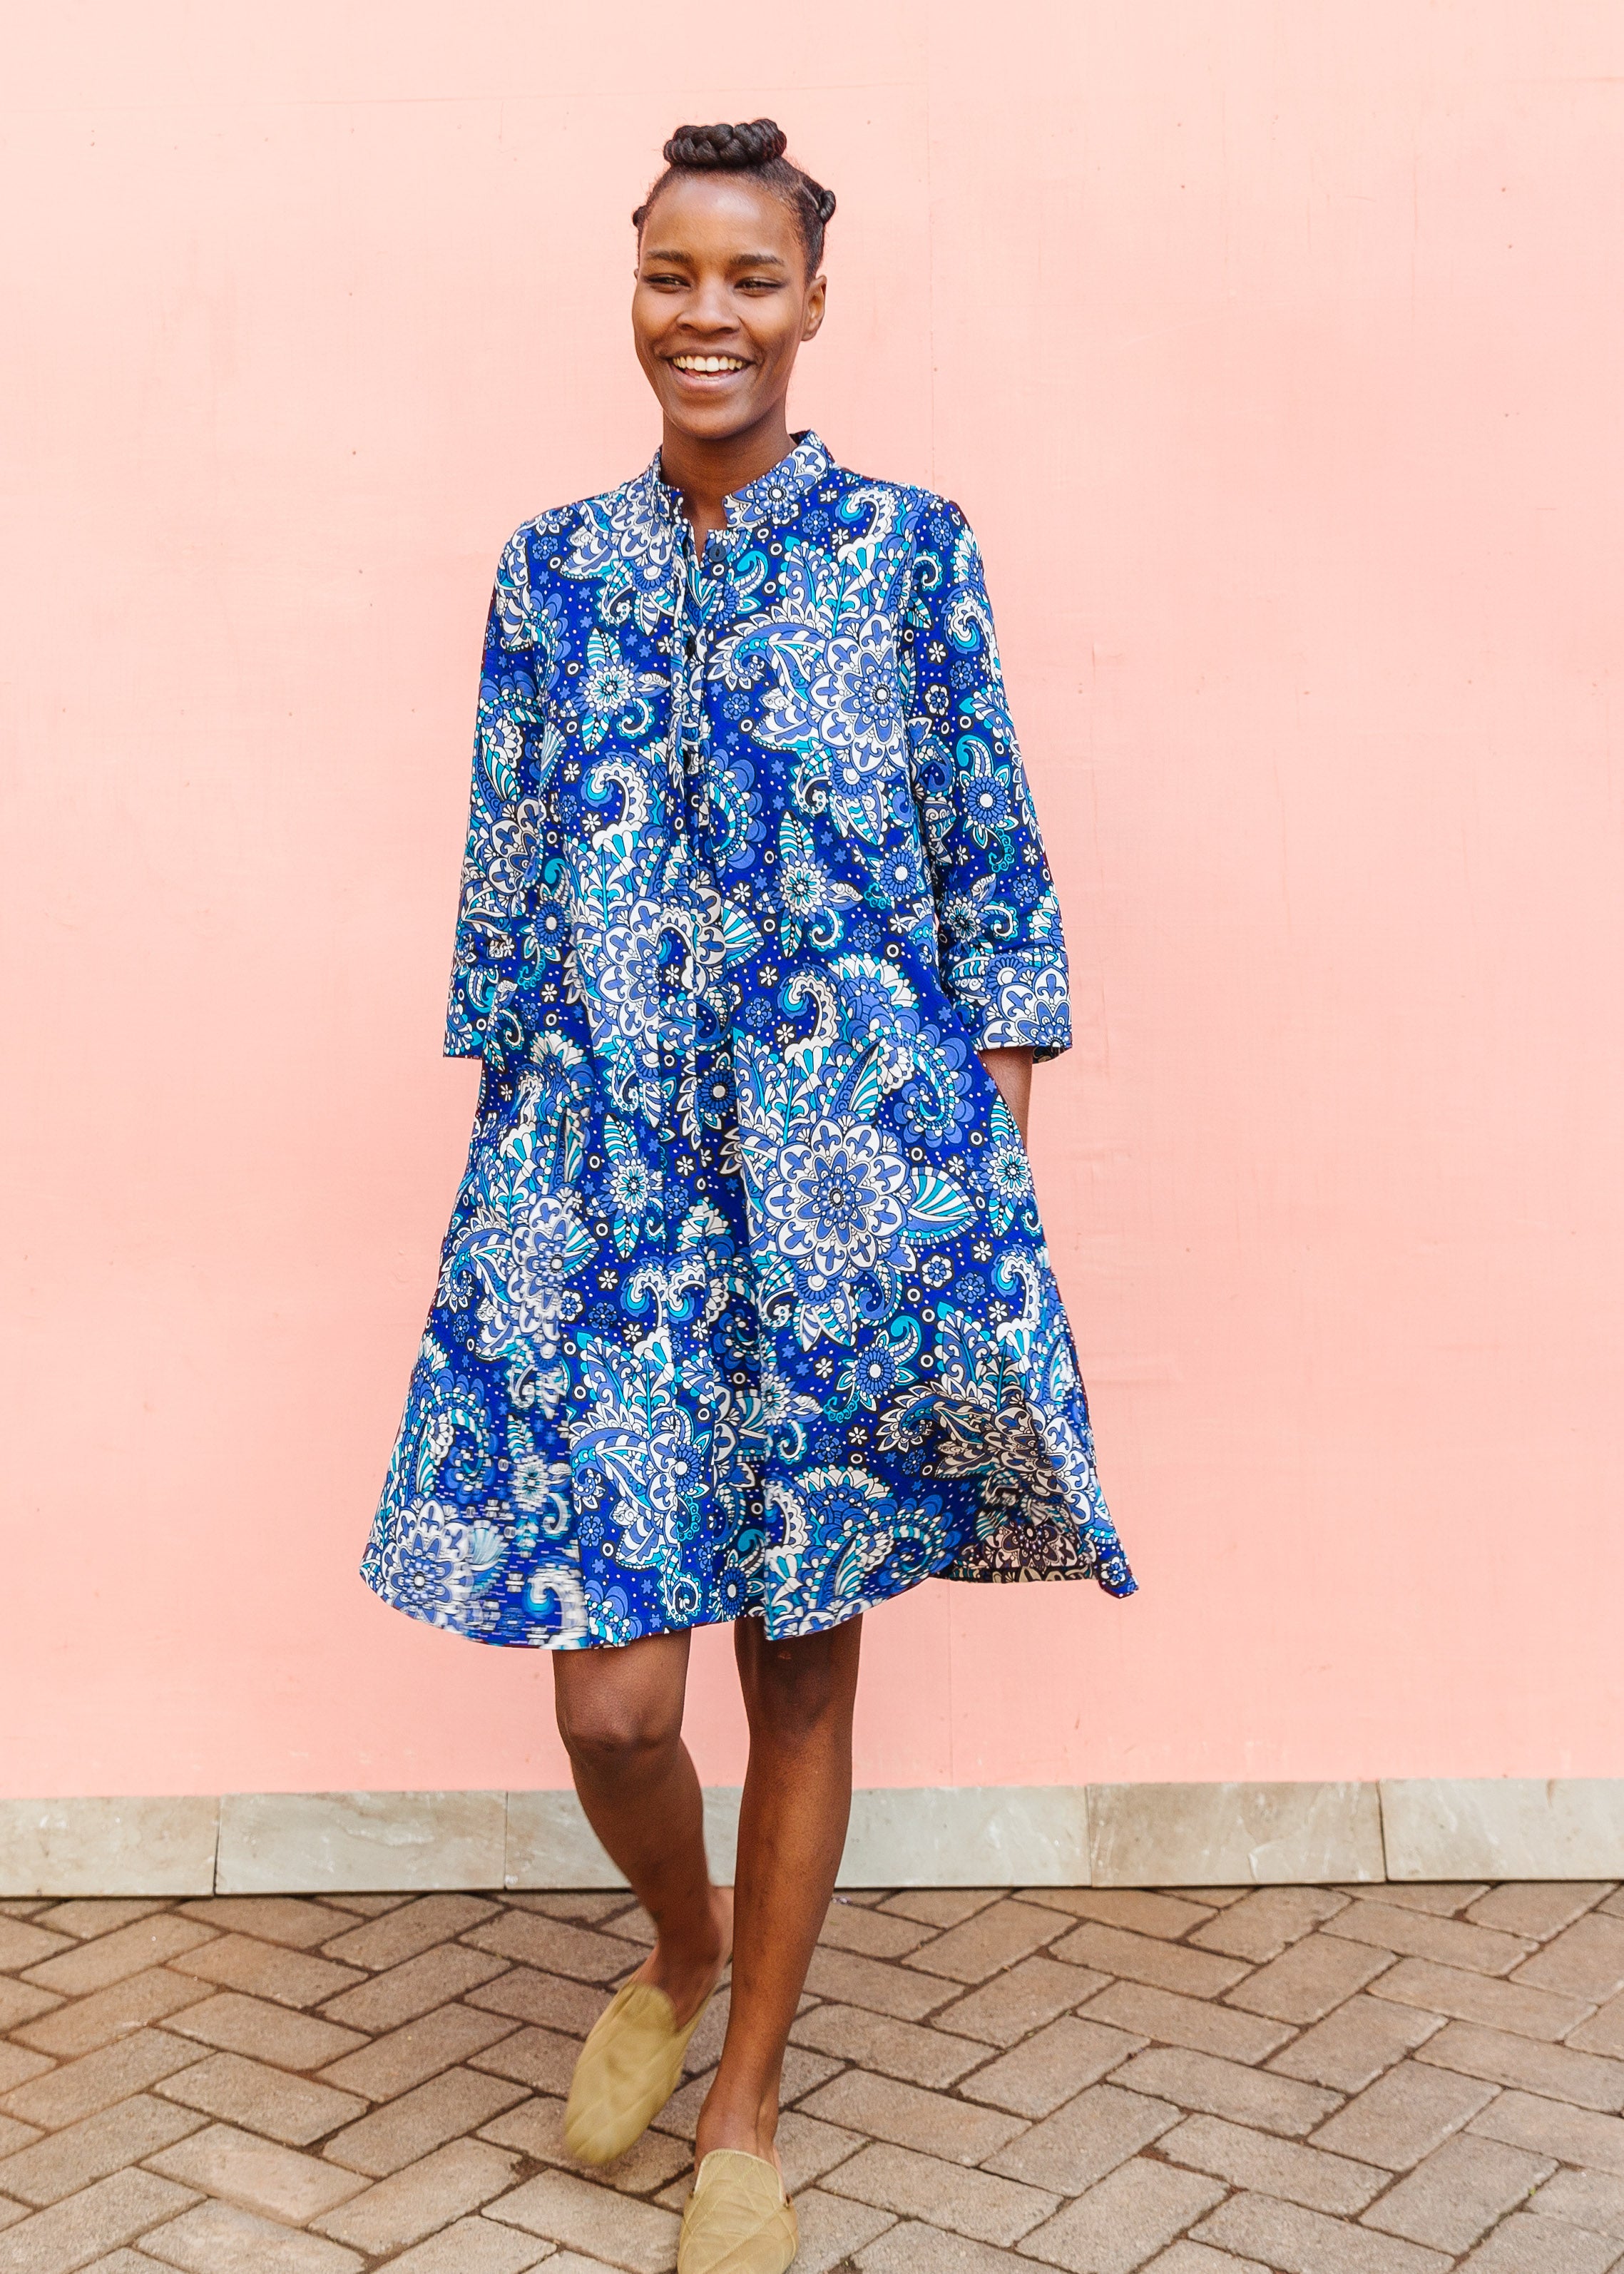 Model wearing blue paisley dress, paired with tan flats.